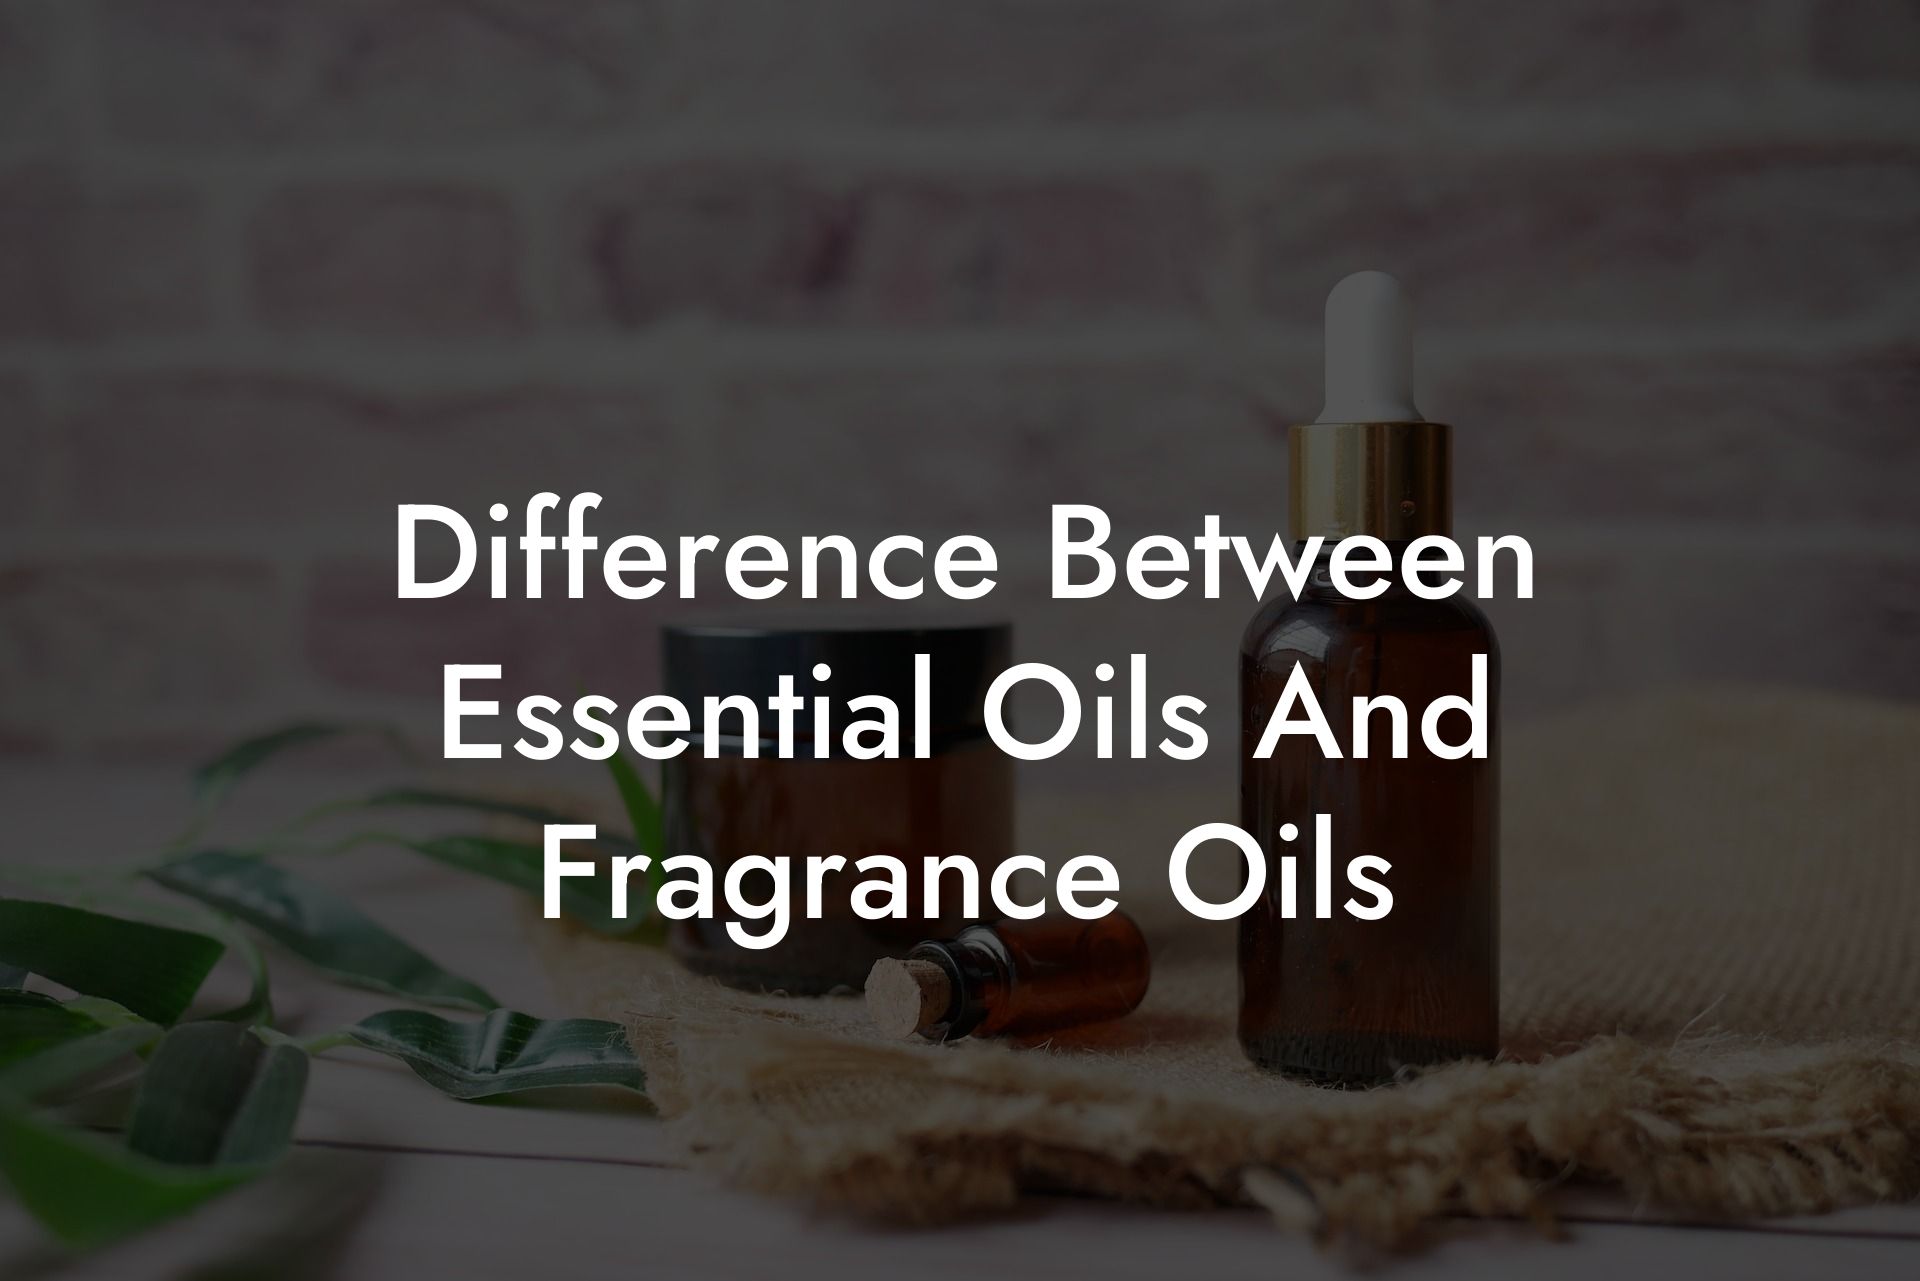 Difference Between Essential Oils And Fragrance Oils